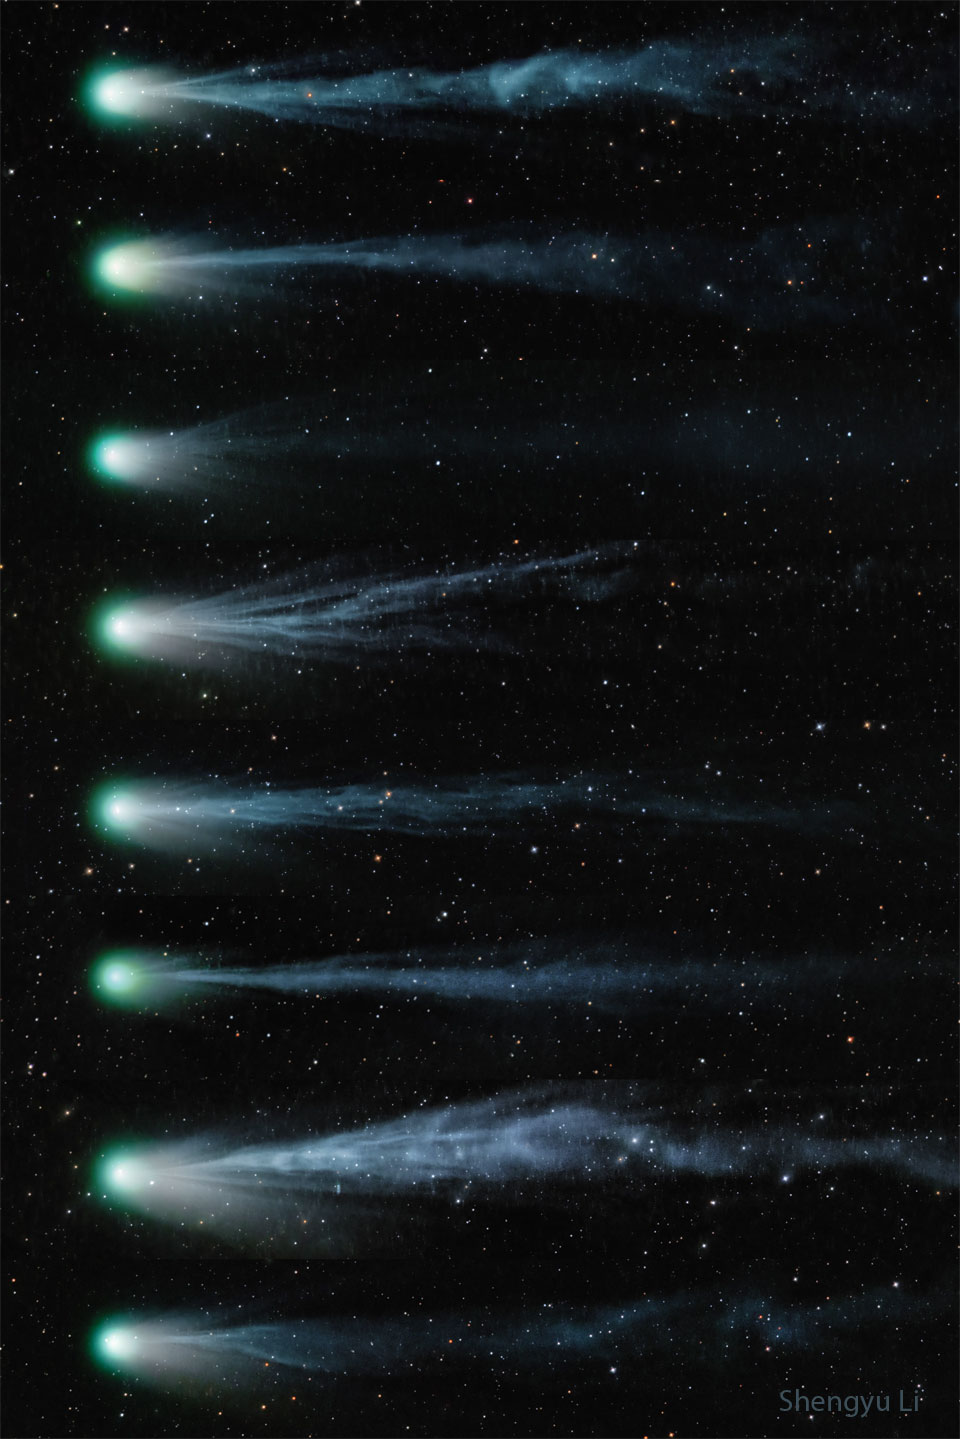 A sequence of eight images of Comet Pons-Brooks, from top
to bottom, showing the comet and its changing tail over
9 days. The ion tail looks very different in each of the
images, sometimes being much more complex than other times.
Please see the explanation for more detailed information.